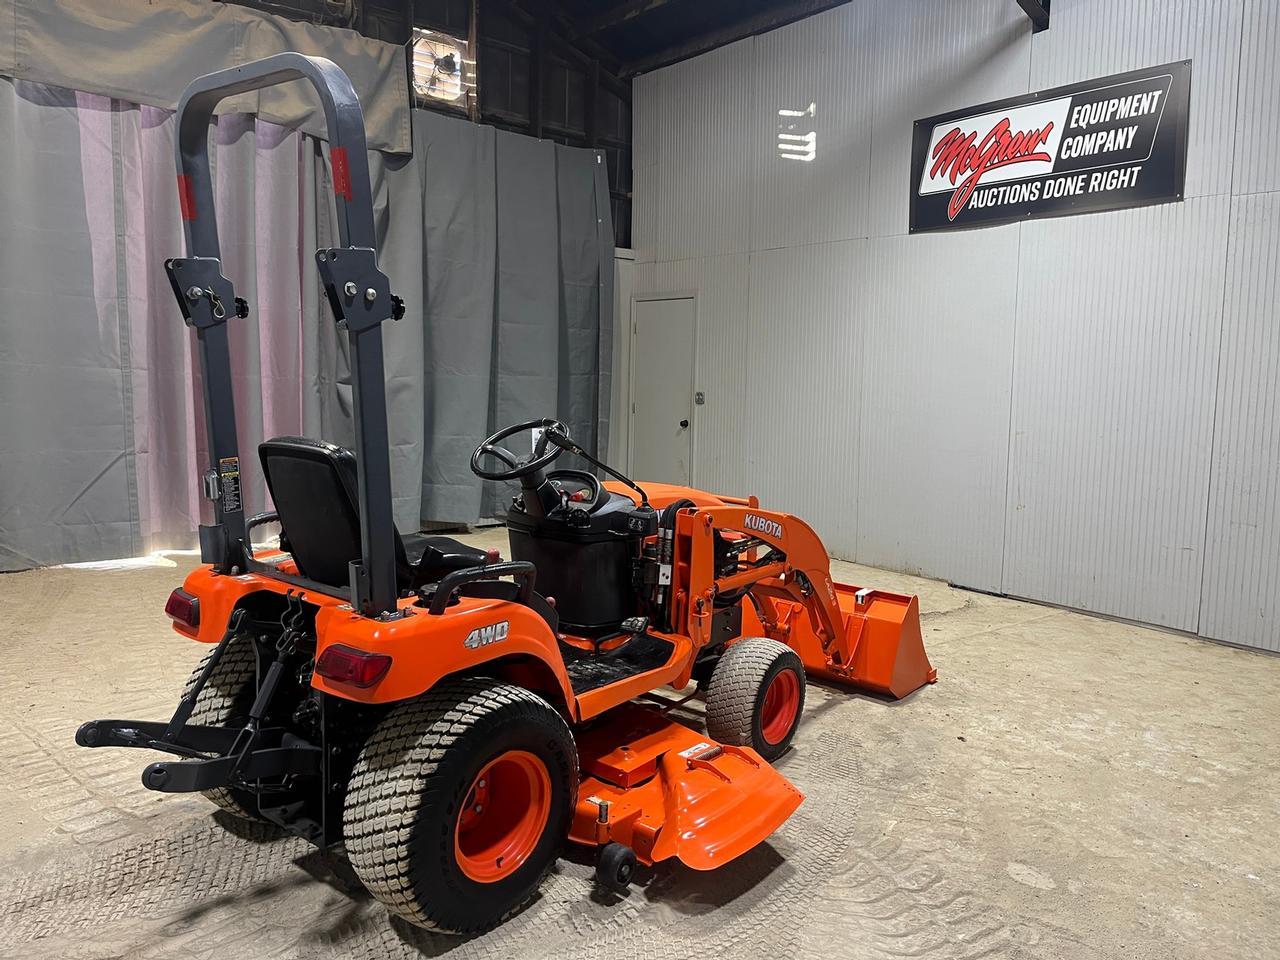 2014 Kubota BX2670 Compact Tractor with Loader & Belly Mower